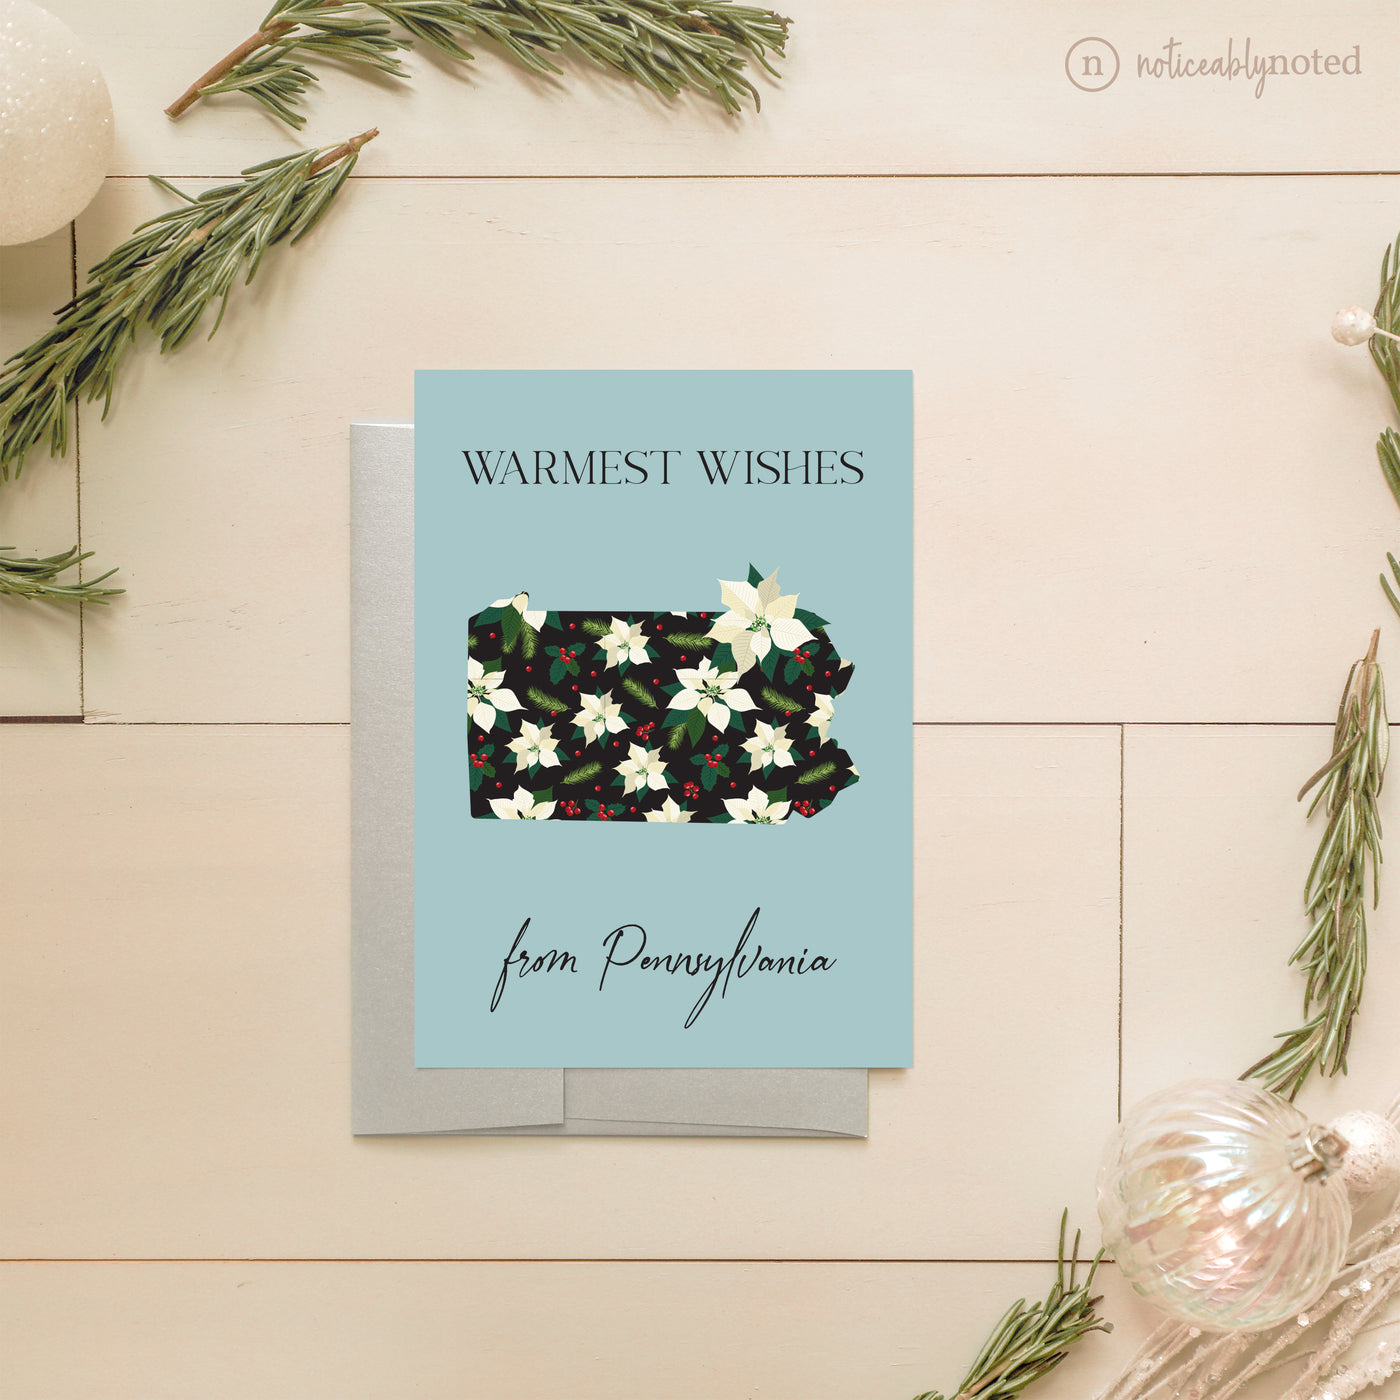 Pennsylvania Holiday Greeting Card | Noticeably Noted